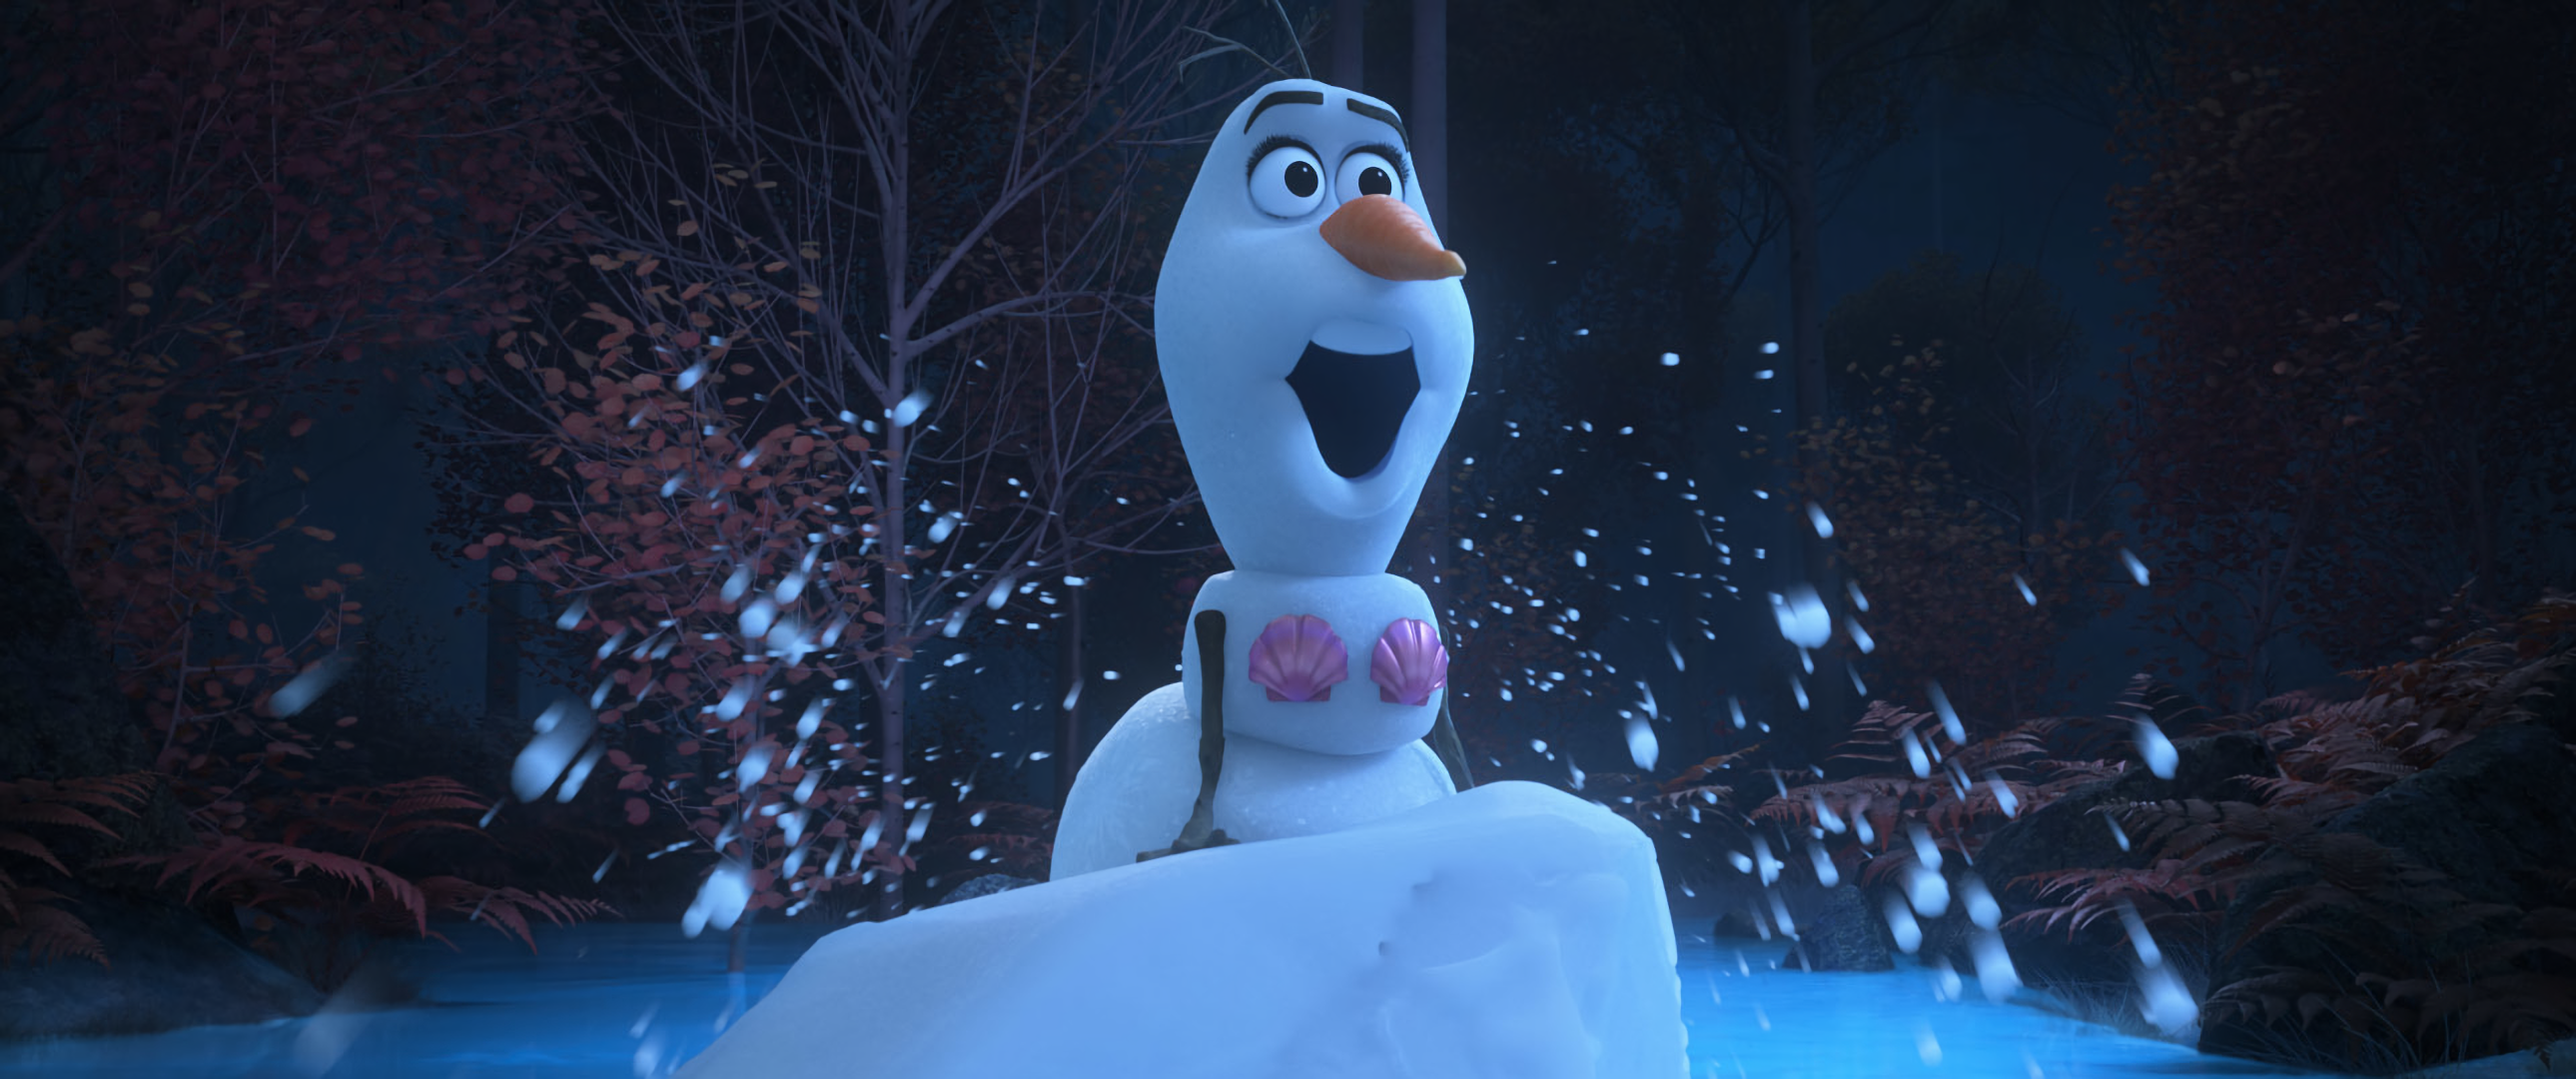 70+ Olaf (Frozen) HD Wallpapers and Backgrounds